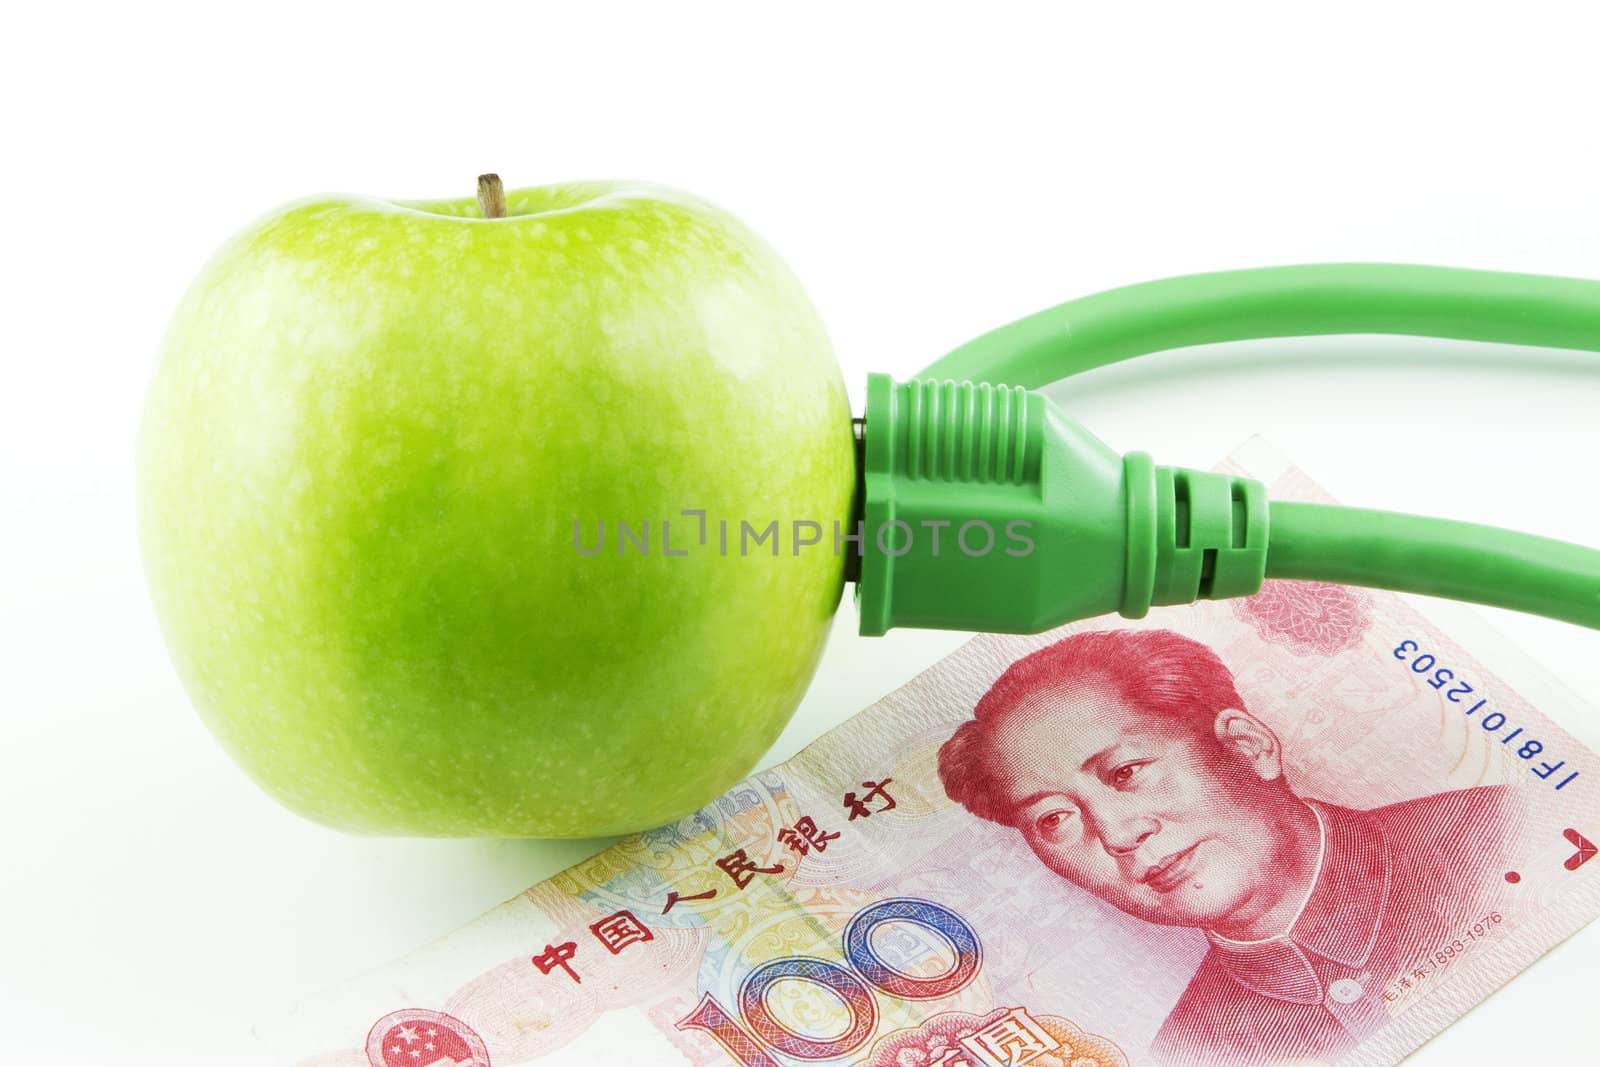 Green apple placed next to Chinese yuan currency emphasize China's fresh support of energy innovation